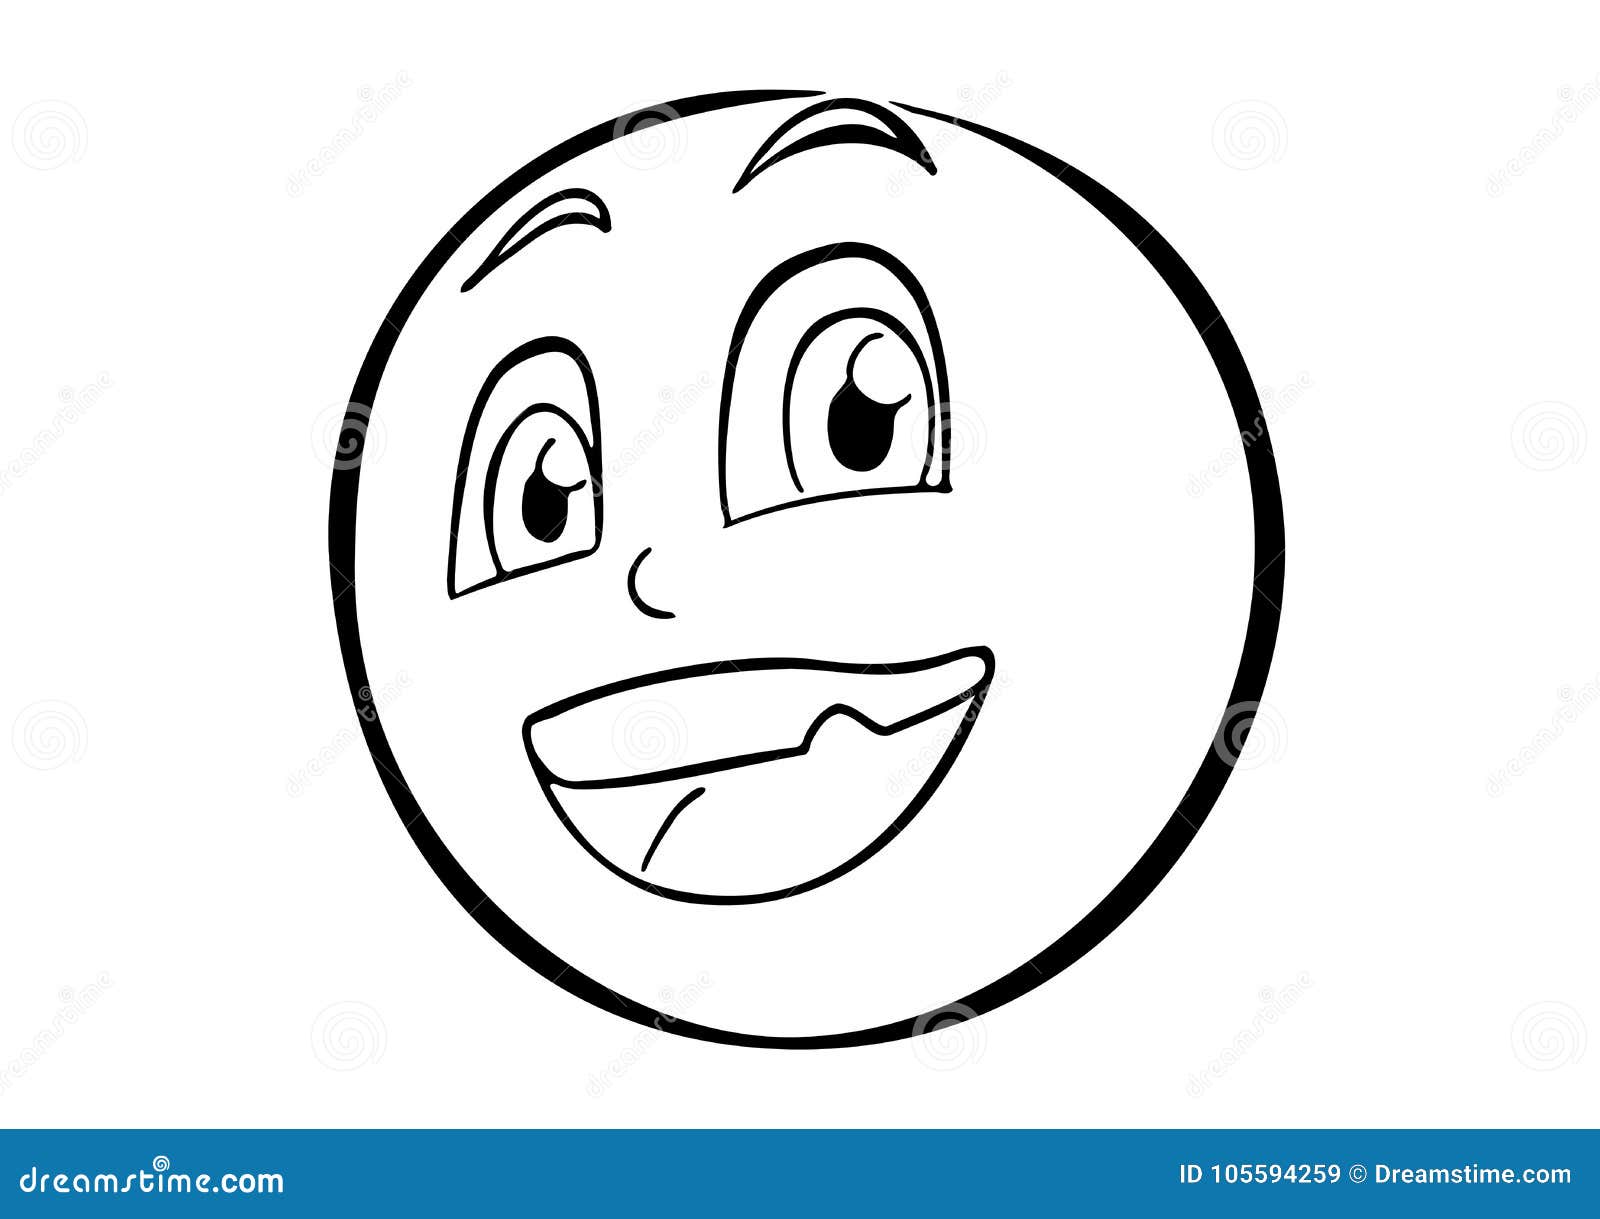 Inconsistencies in the drawing and interpretation of smiley faces: an  observational study | BMC Research Notes | Full Text